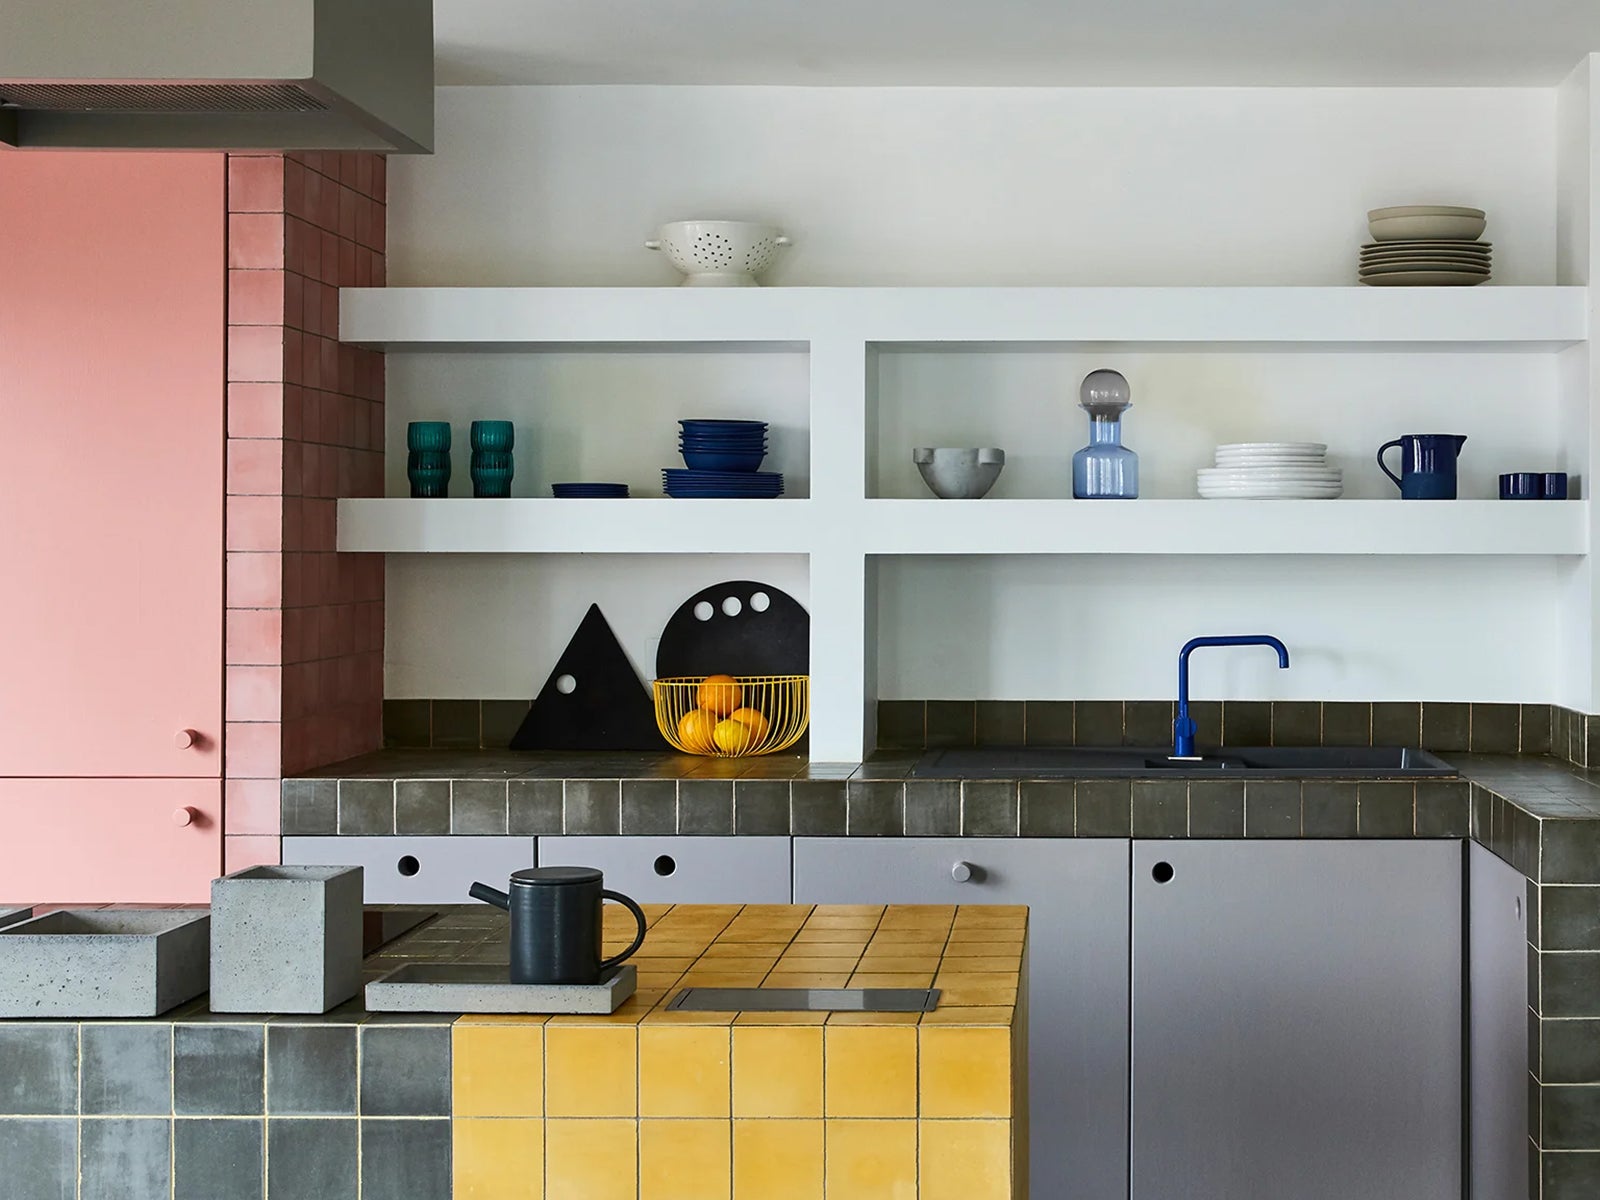 British Designers Love These Tiles—Now You Can Get Them in the U.S.